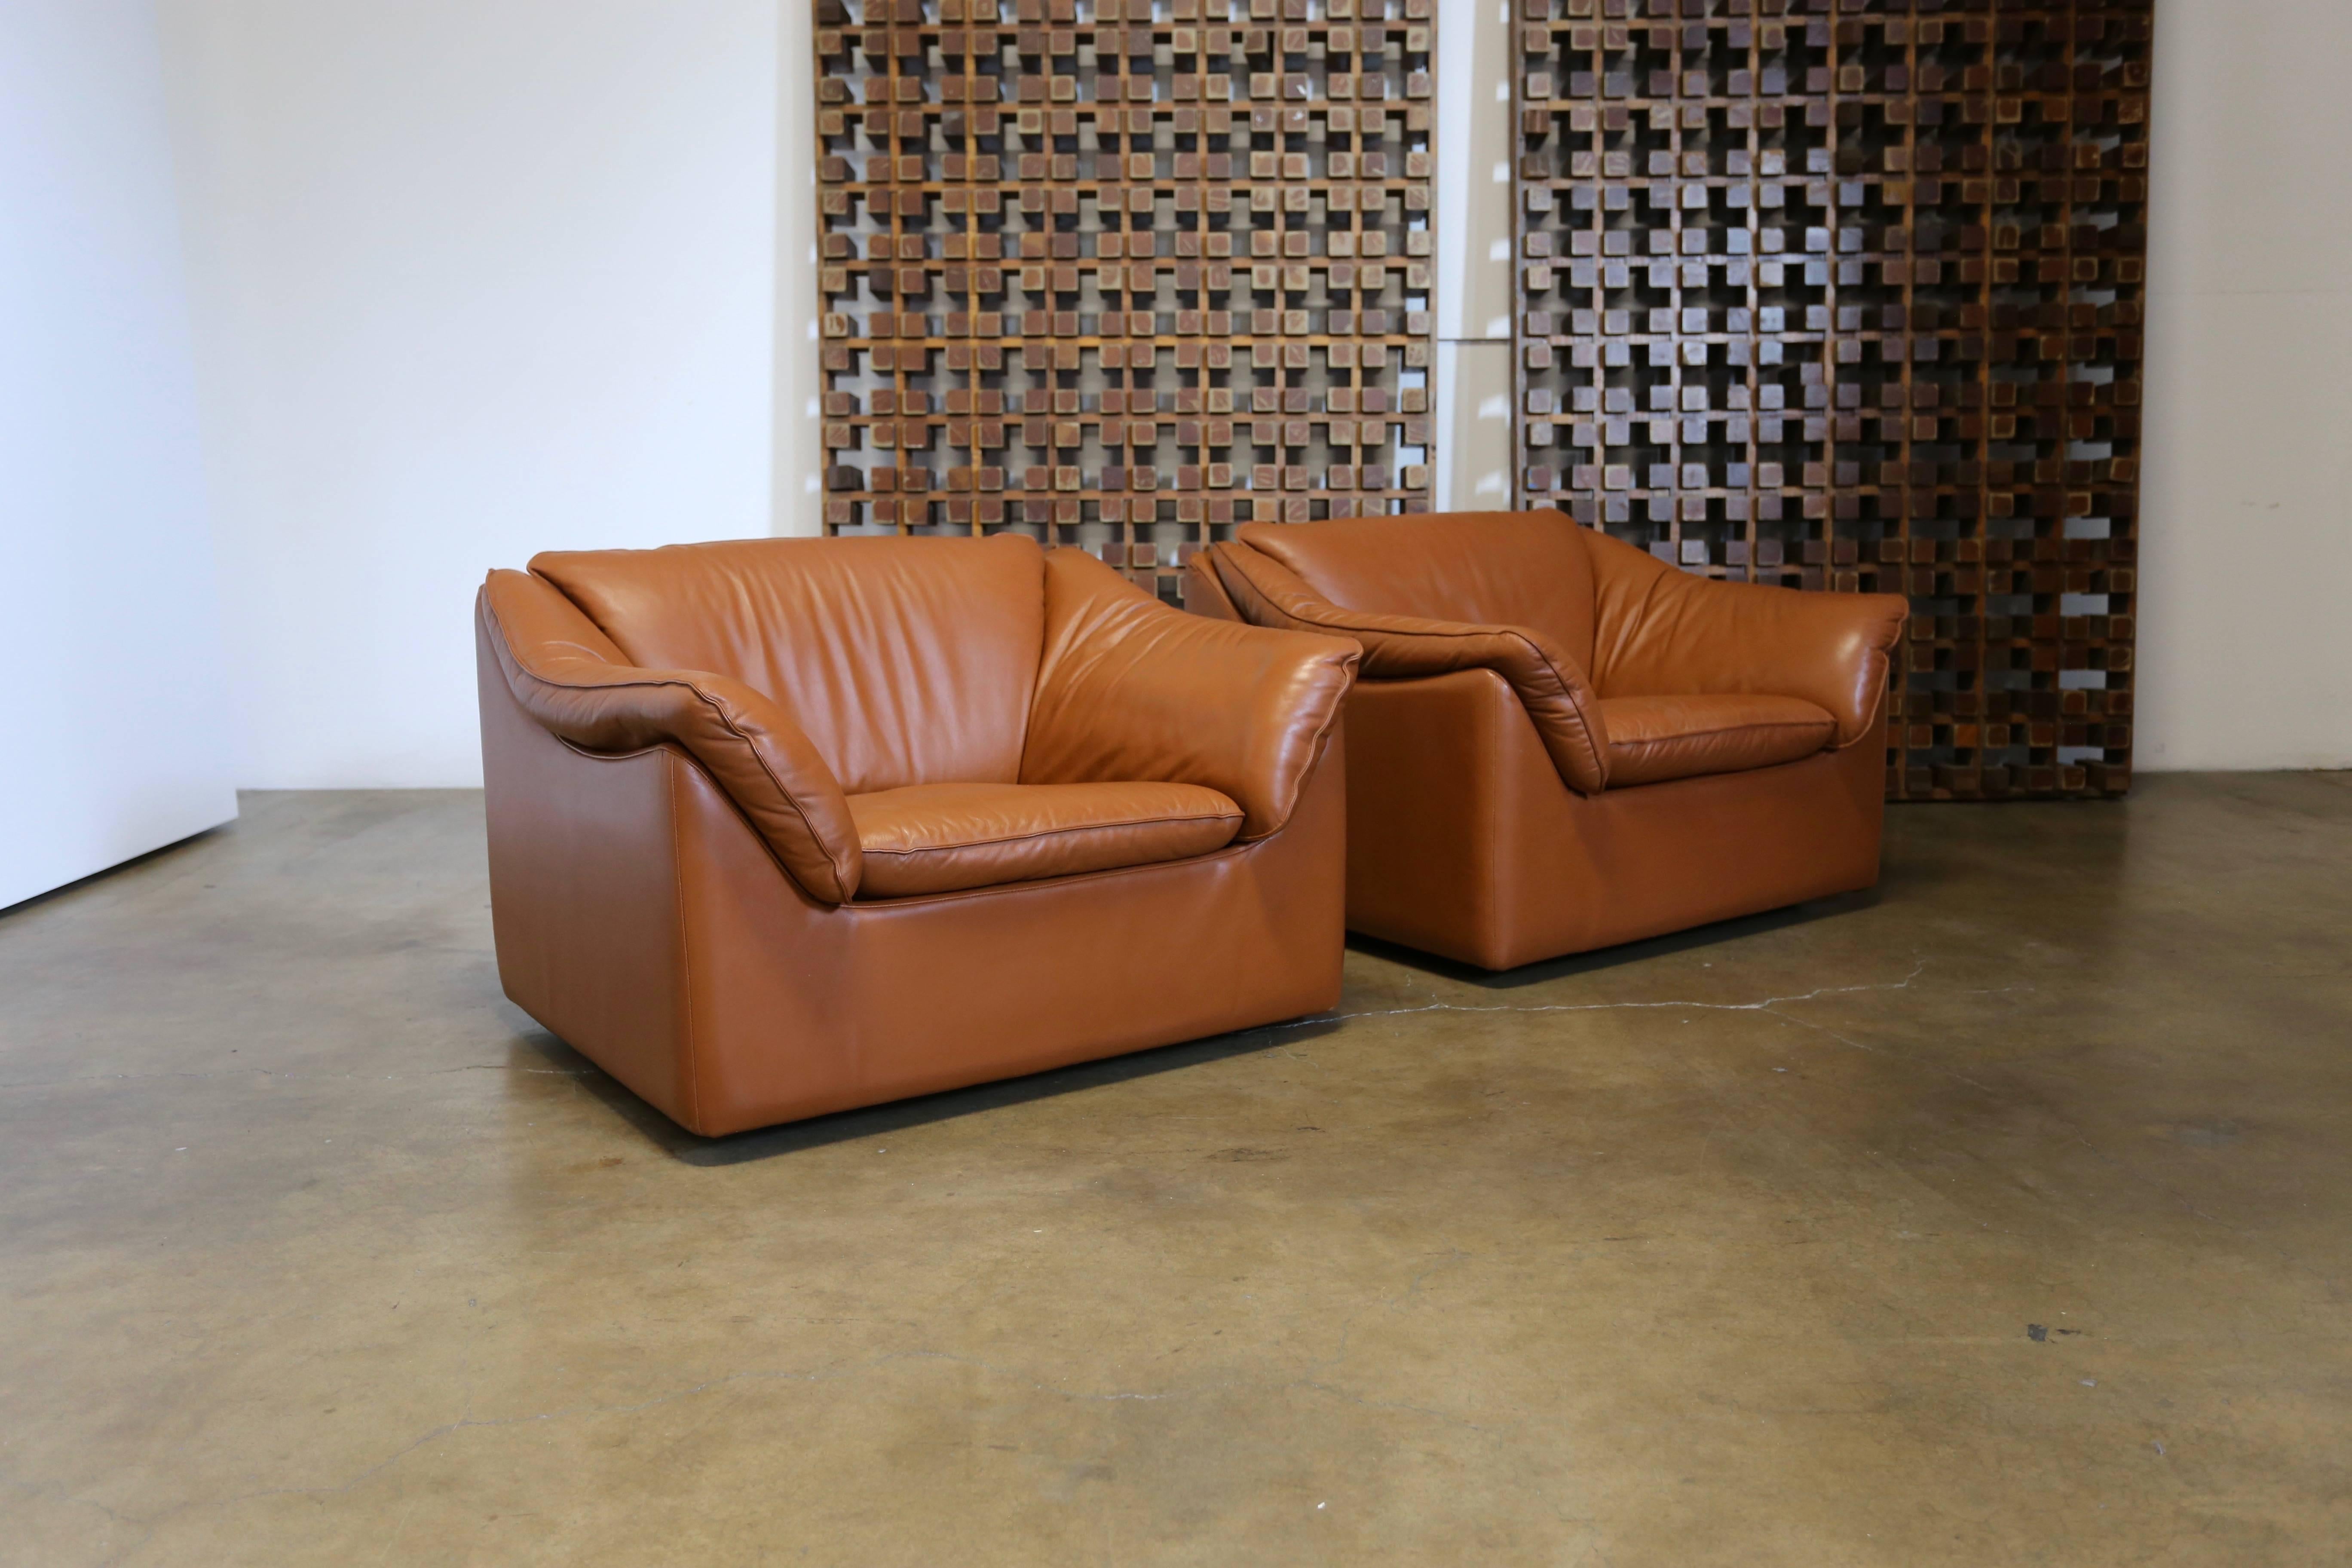 Pair of leather lounge chairs by Metropolitan Furniture Co.